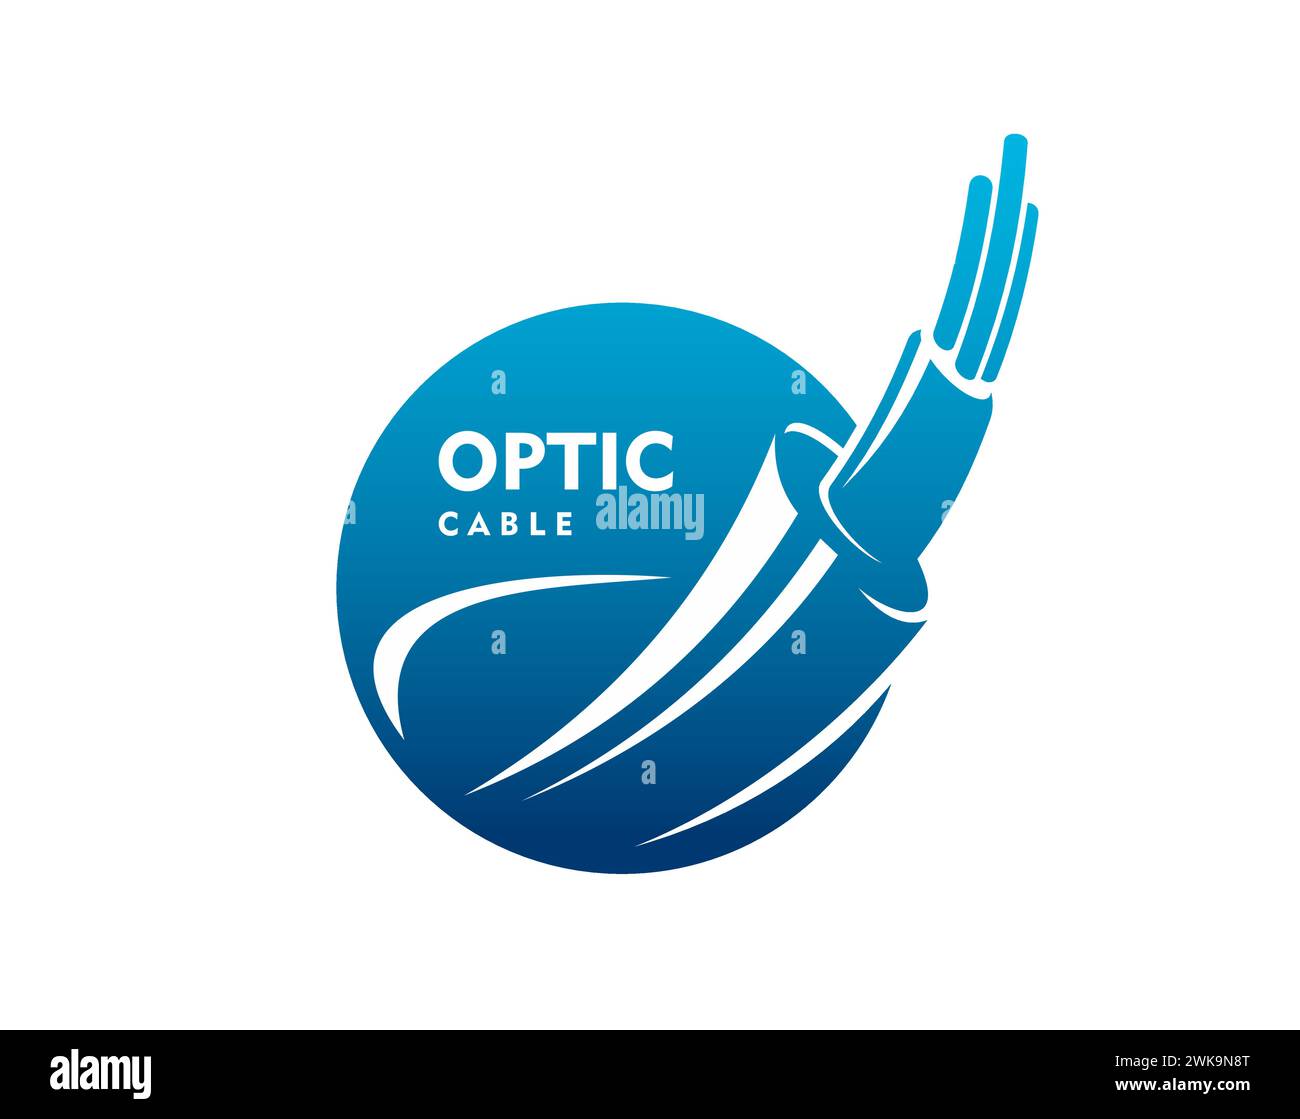 Fiber optic cable icon, technology. Isolated vector emblem with dynamic fibre wire broadband strand. Internet connection, telecommunication, high-speed data transmission and networking label with cord Stock Vector